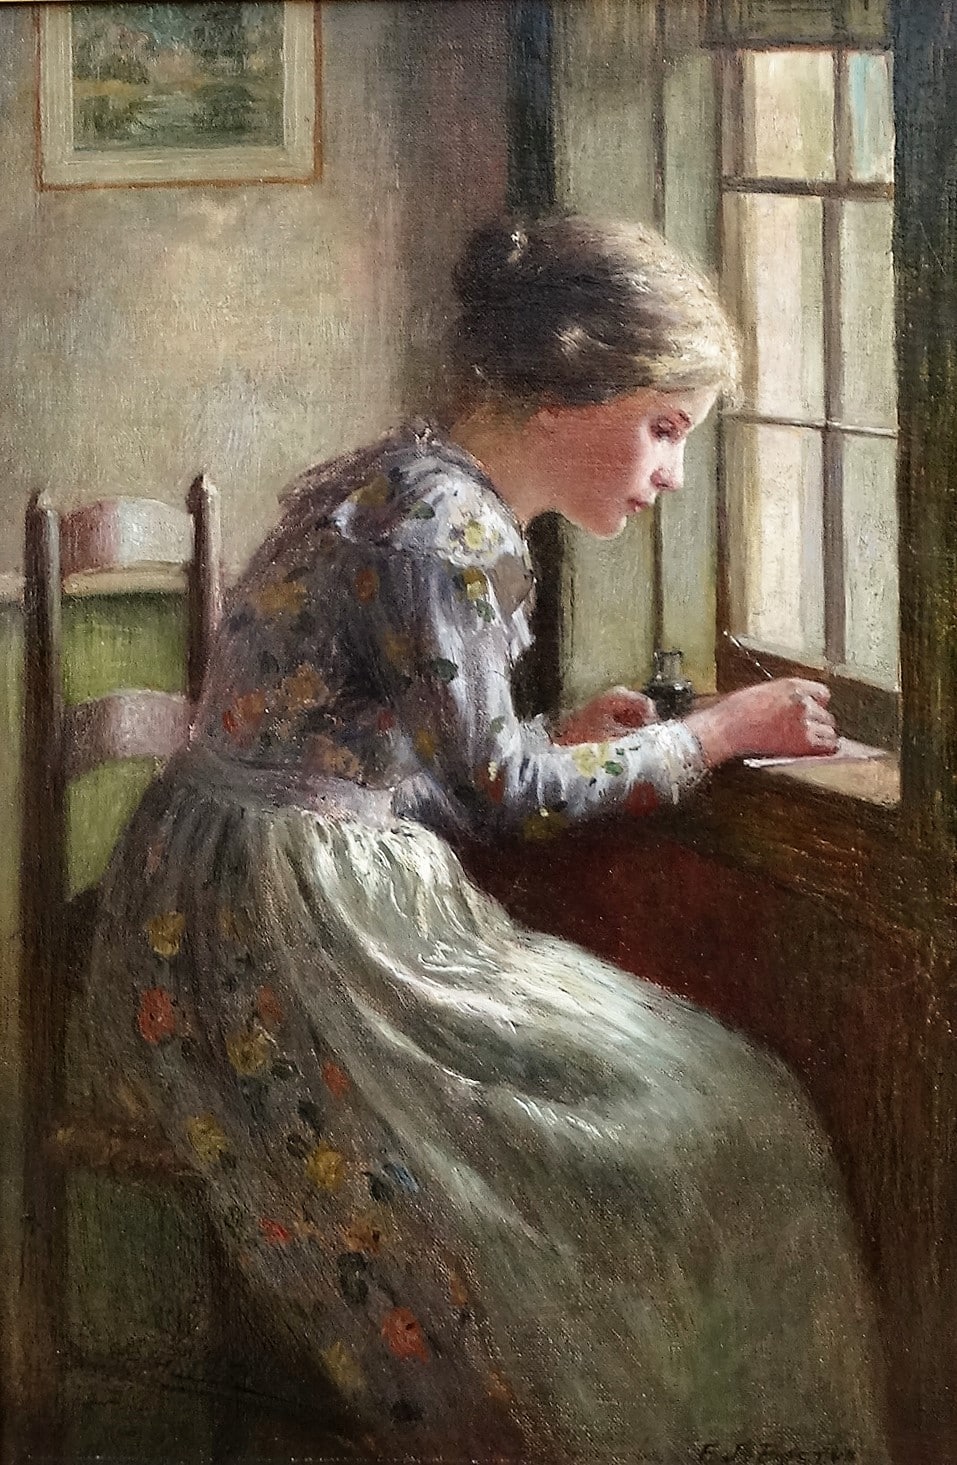 "Writing by the Window"